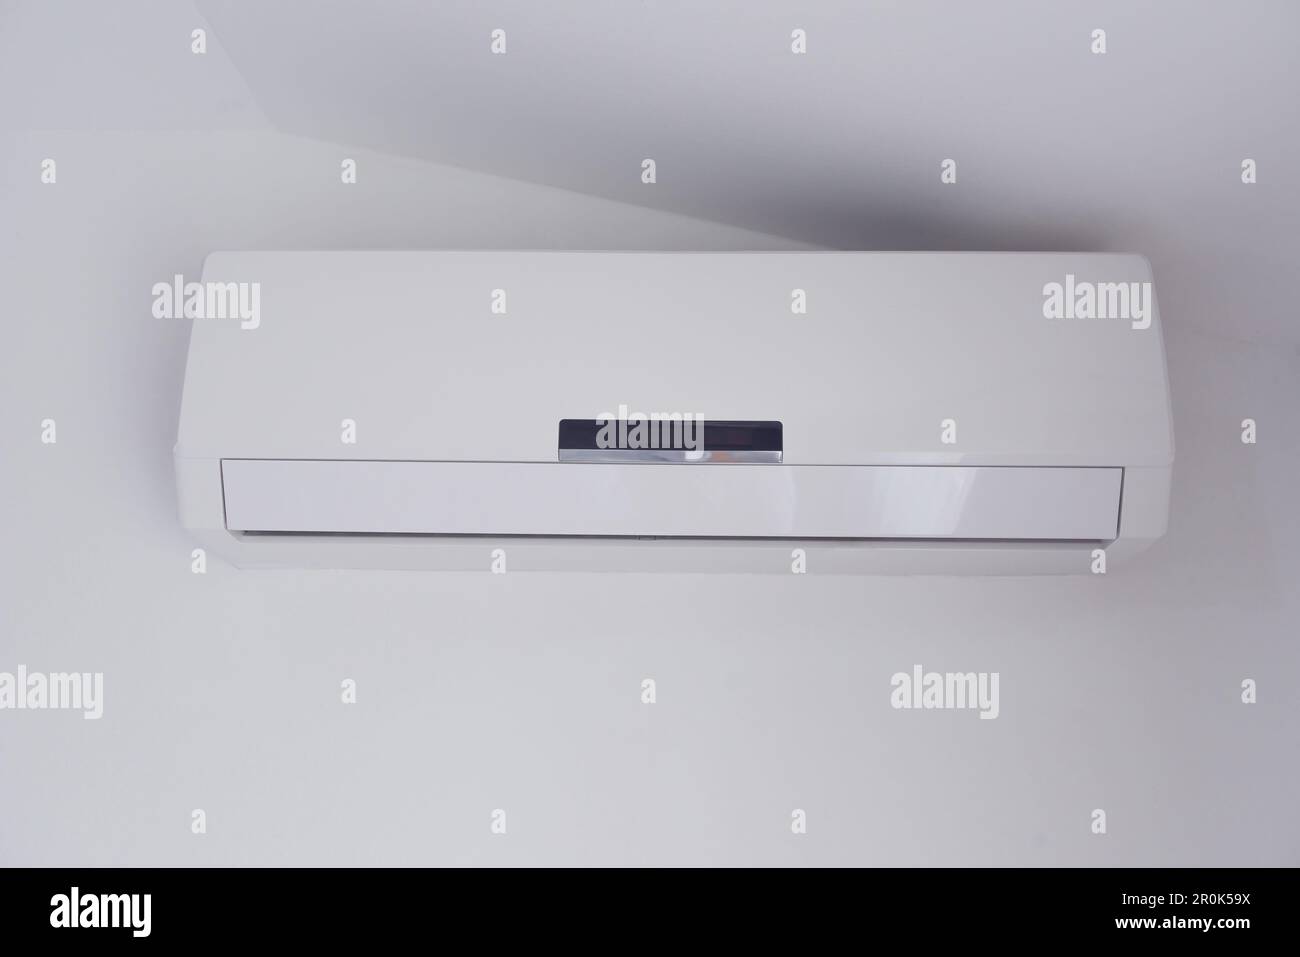 Air conditioner mounted on a white wall of apartment bedroom with copy space Stock Photo